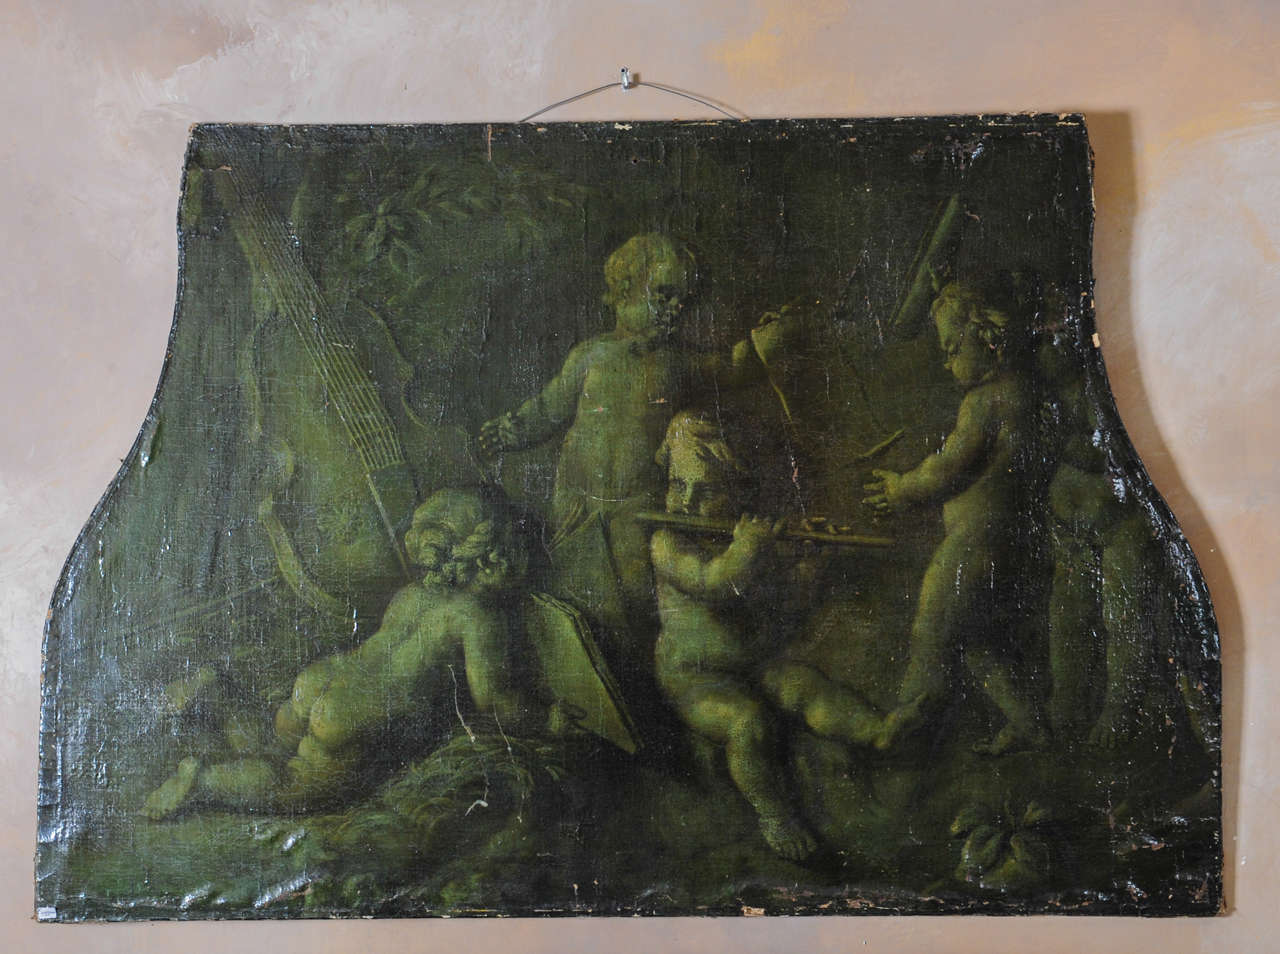 Trompe l'oeil painting of four putti making music, painted in green shades. Oil on canvas.